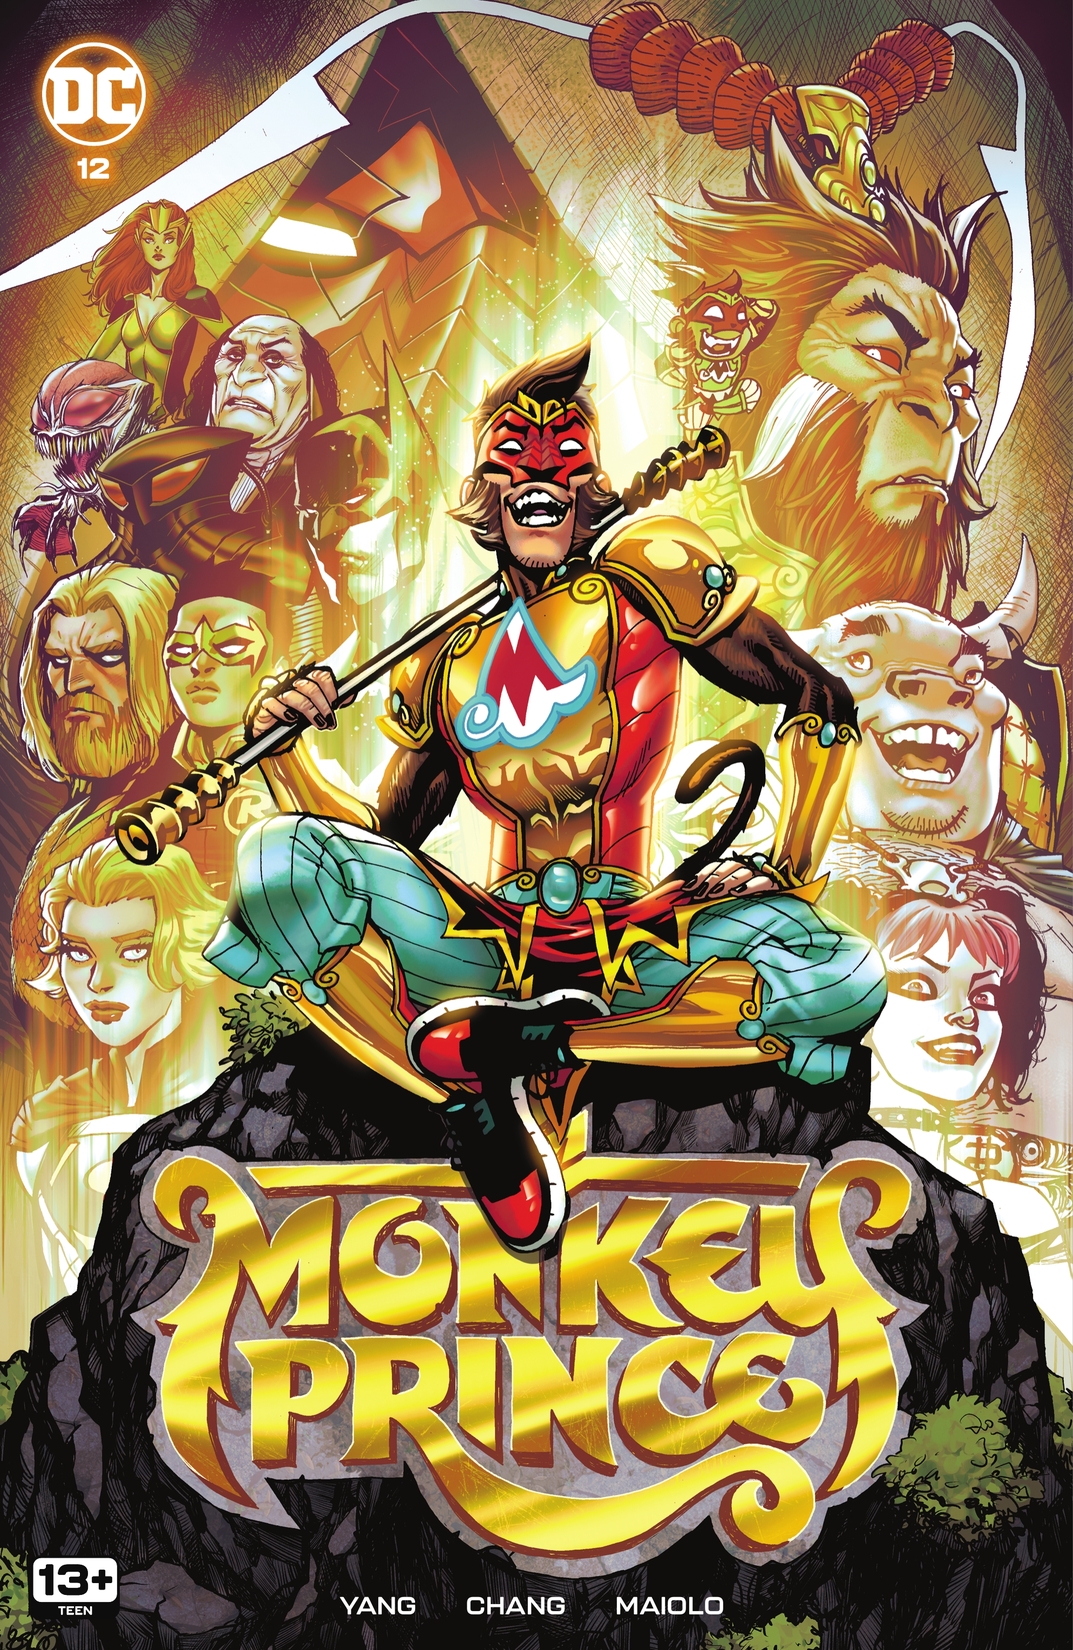 Monkey Prince #12 preview images